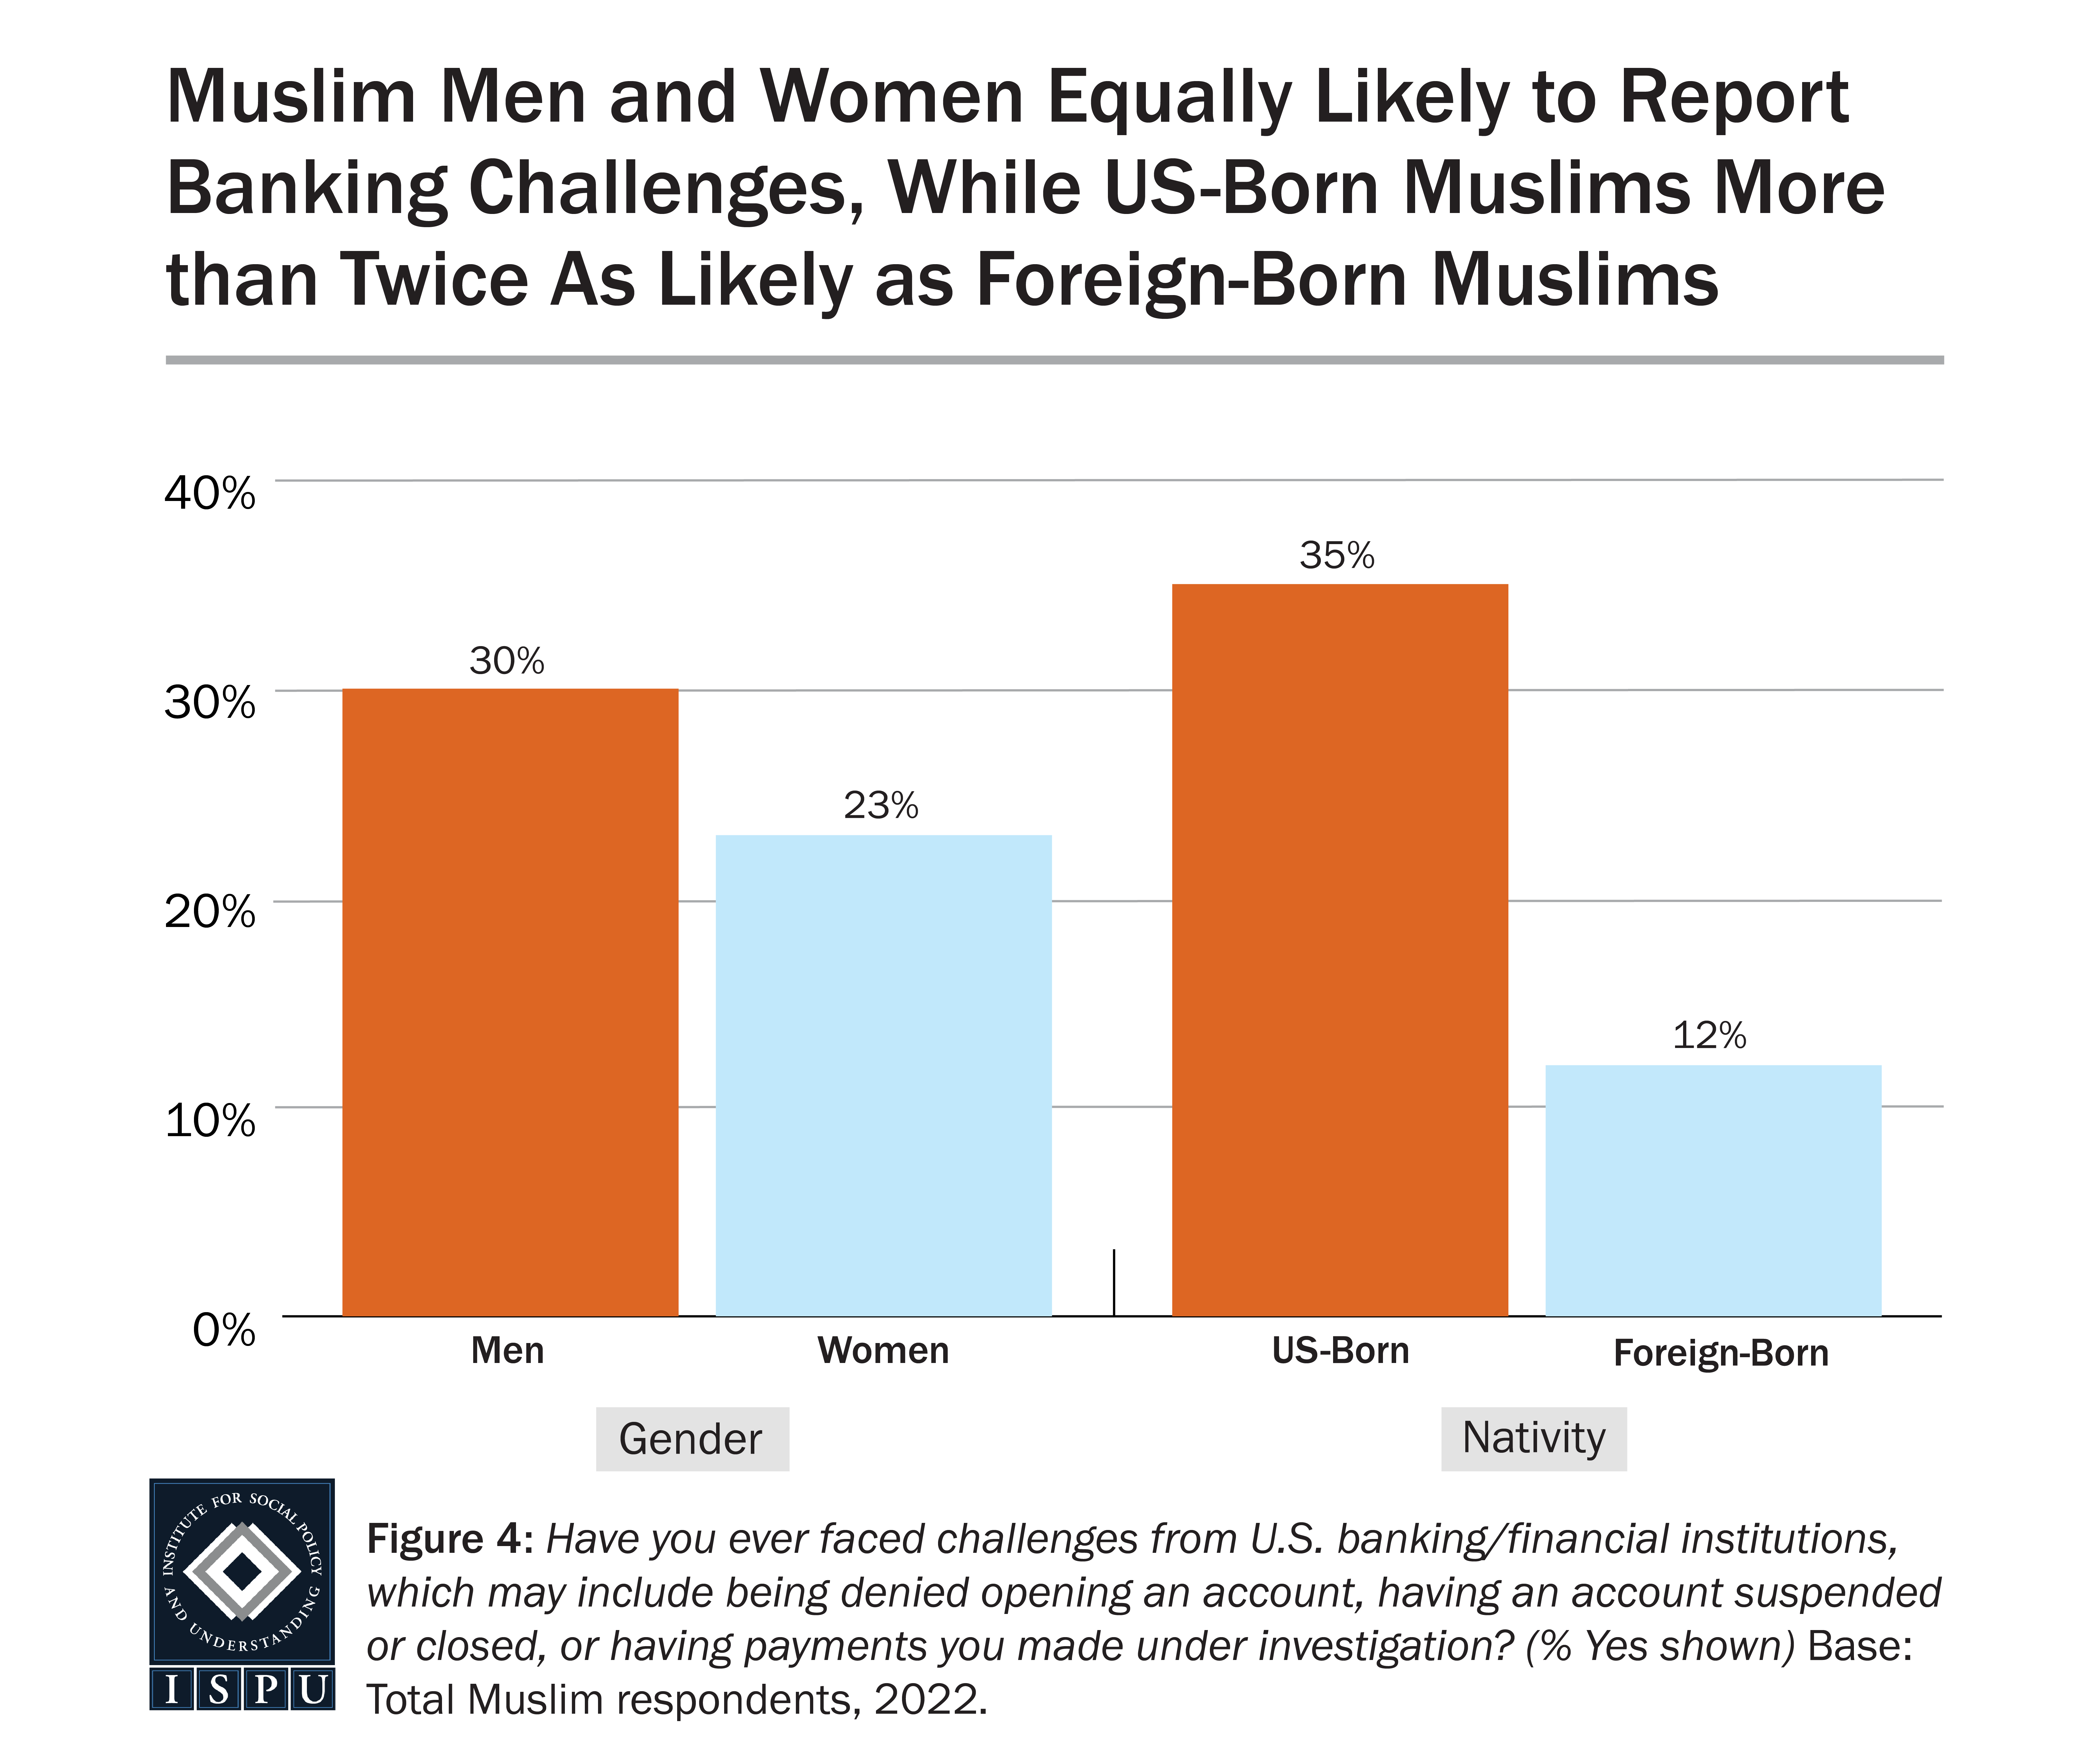 A bar graph showing the proportion of men, women, US-born, and foreign-born Muslims who report facing challenges while banking.